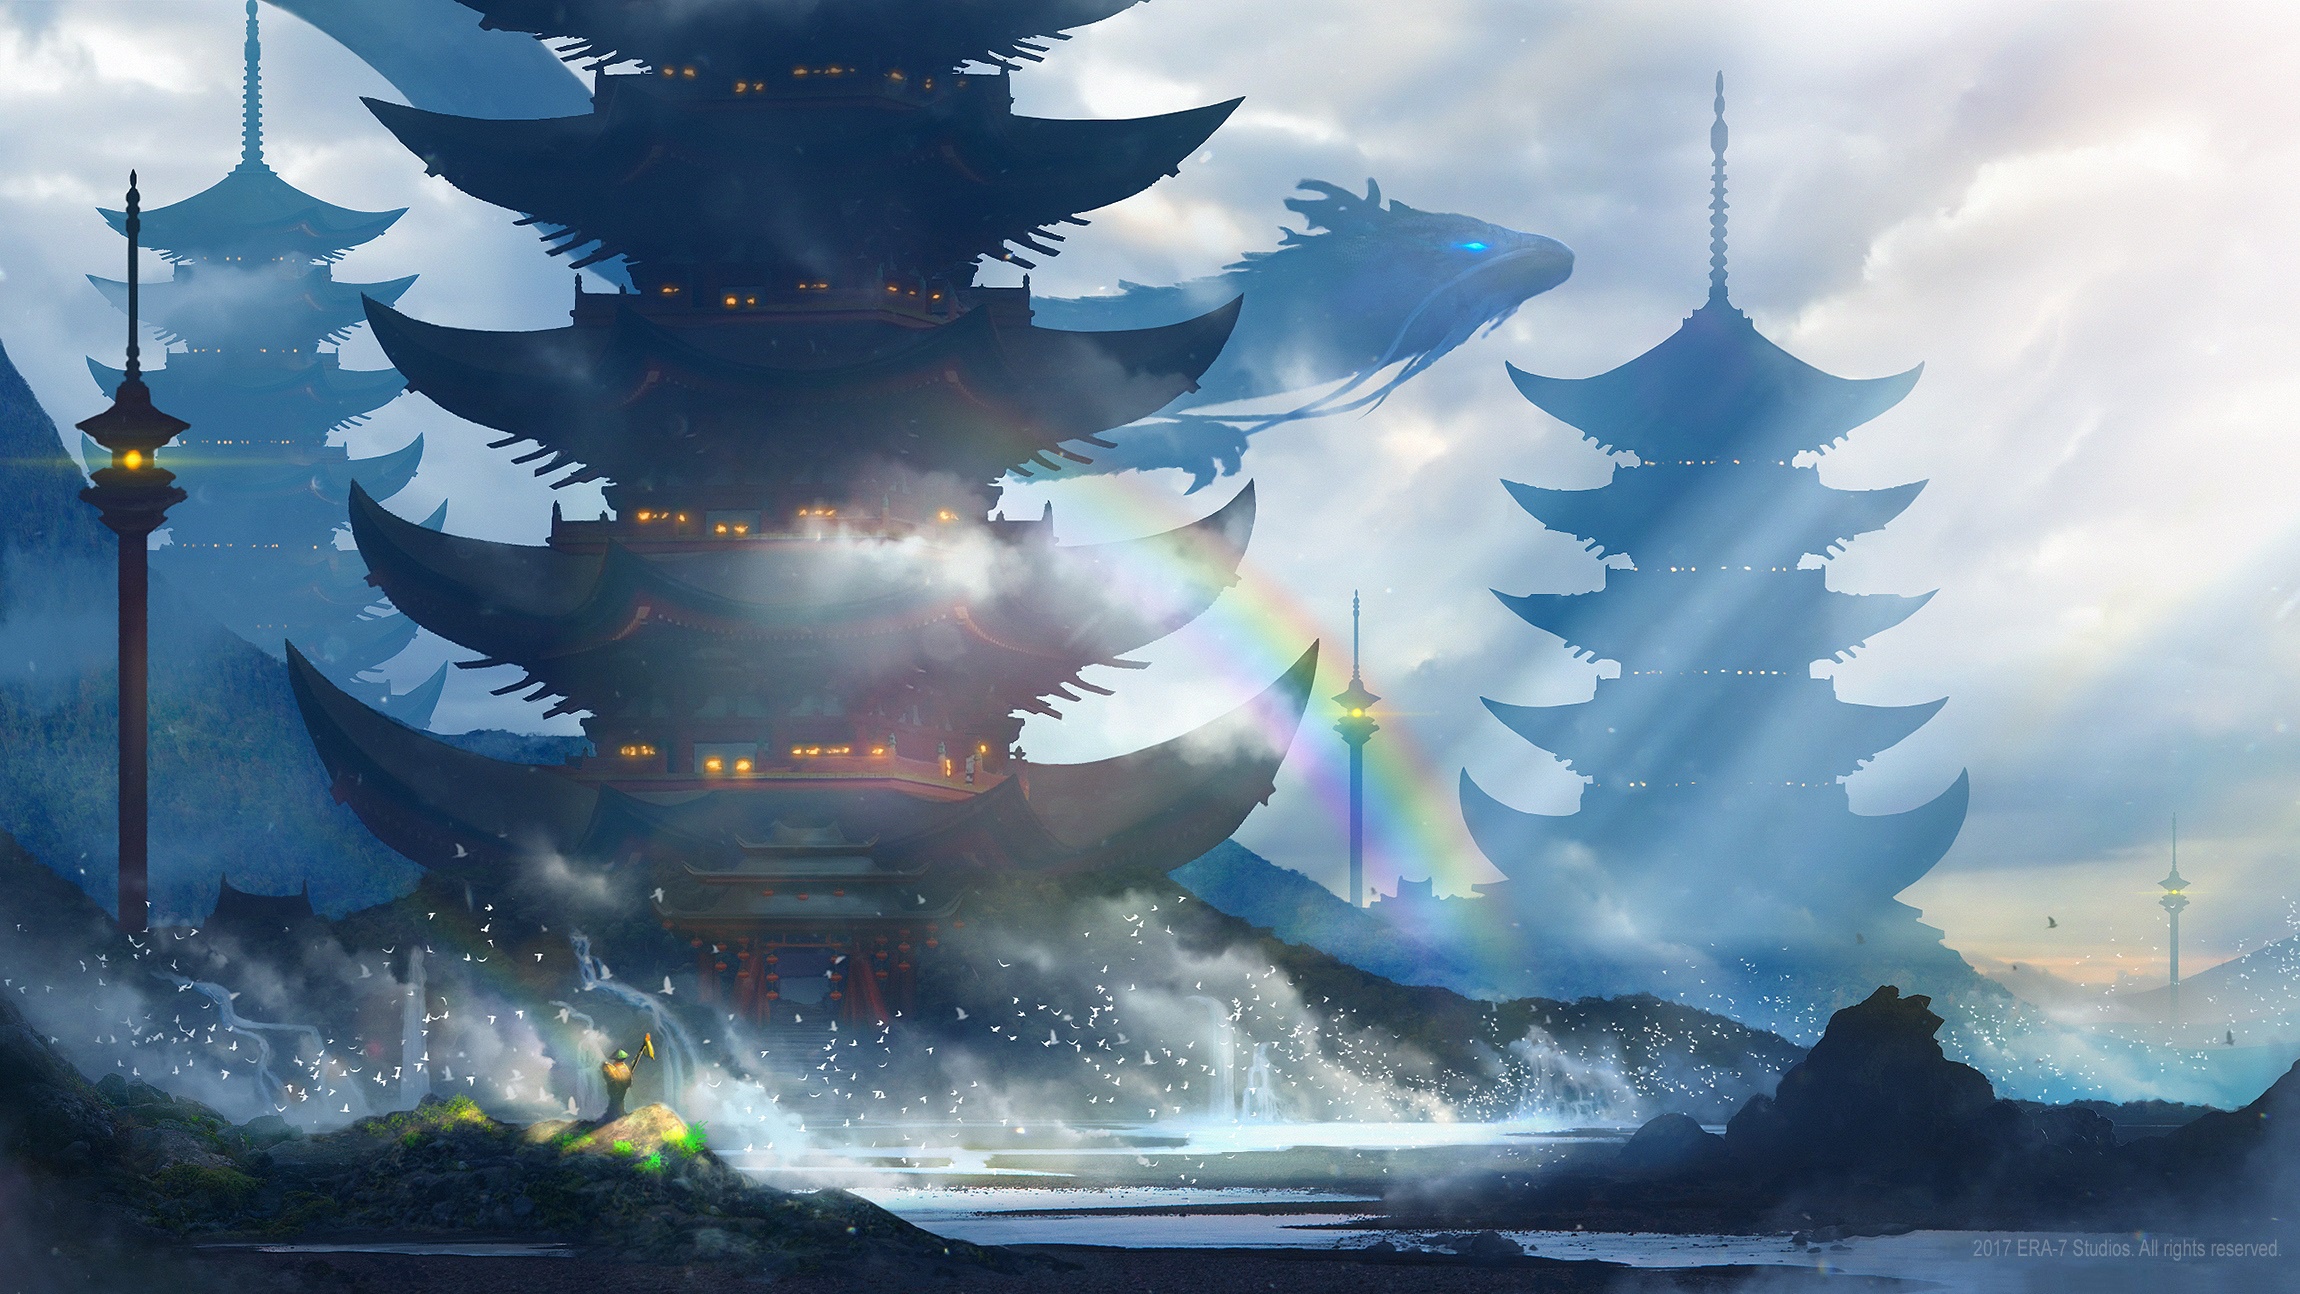 General 2300x1294 castle dragon artwork pagoda Chinese architecture Chinese dragon digital art watermarked